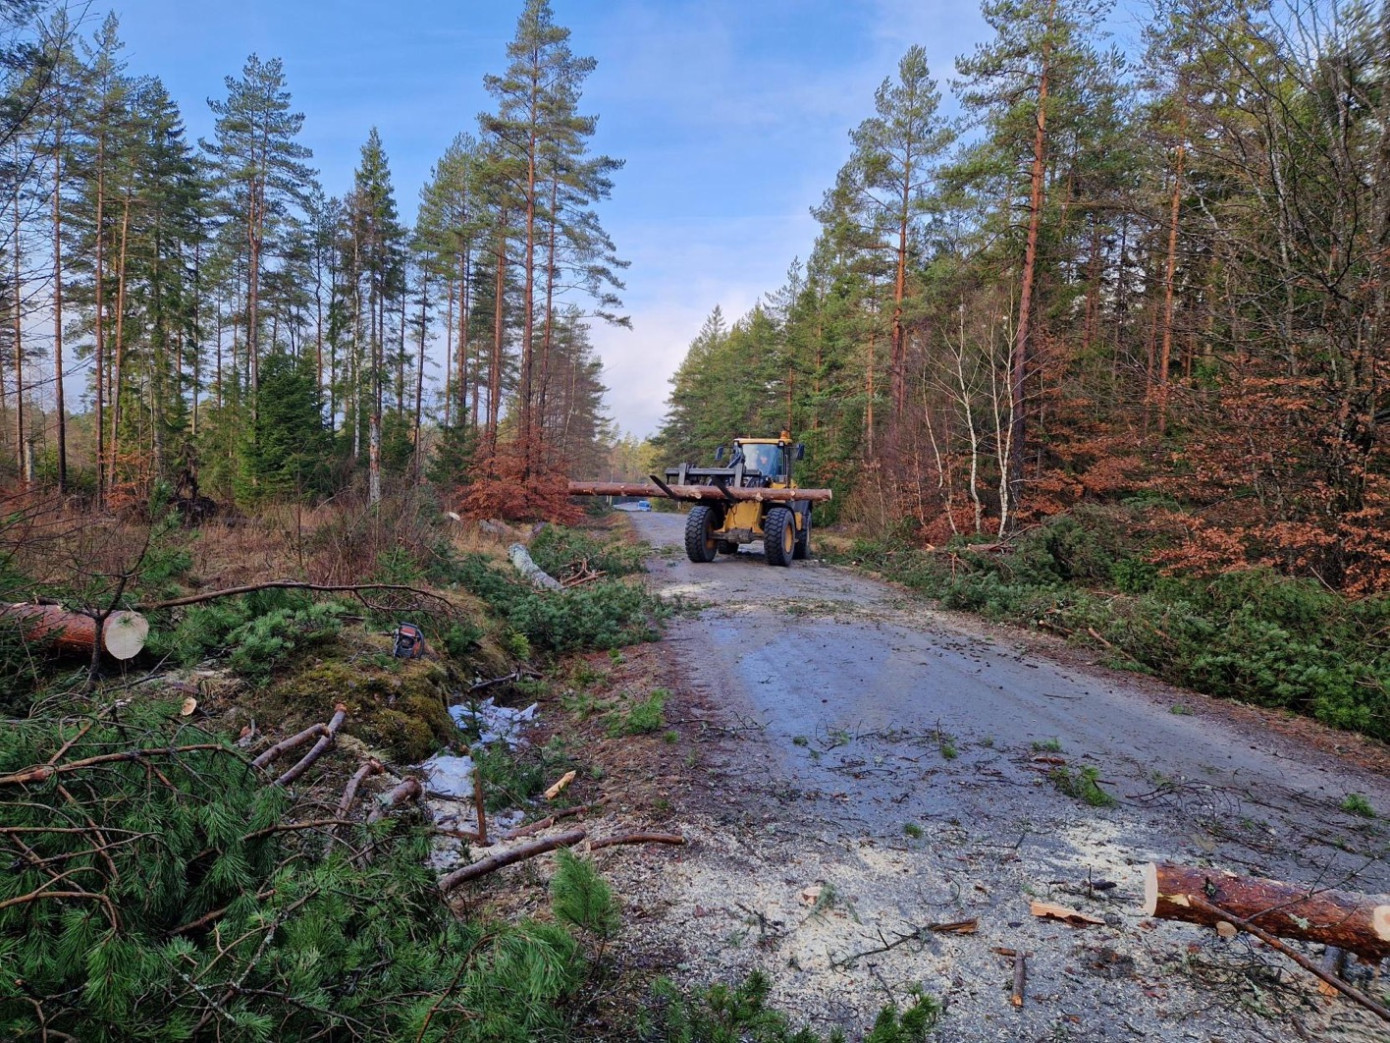 Sweden"s notified area for felling down 13% in March